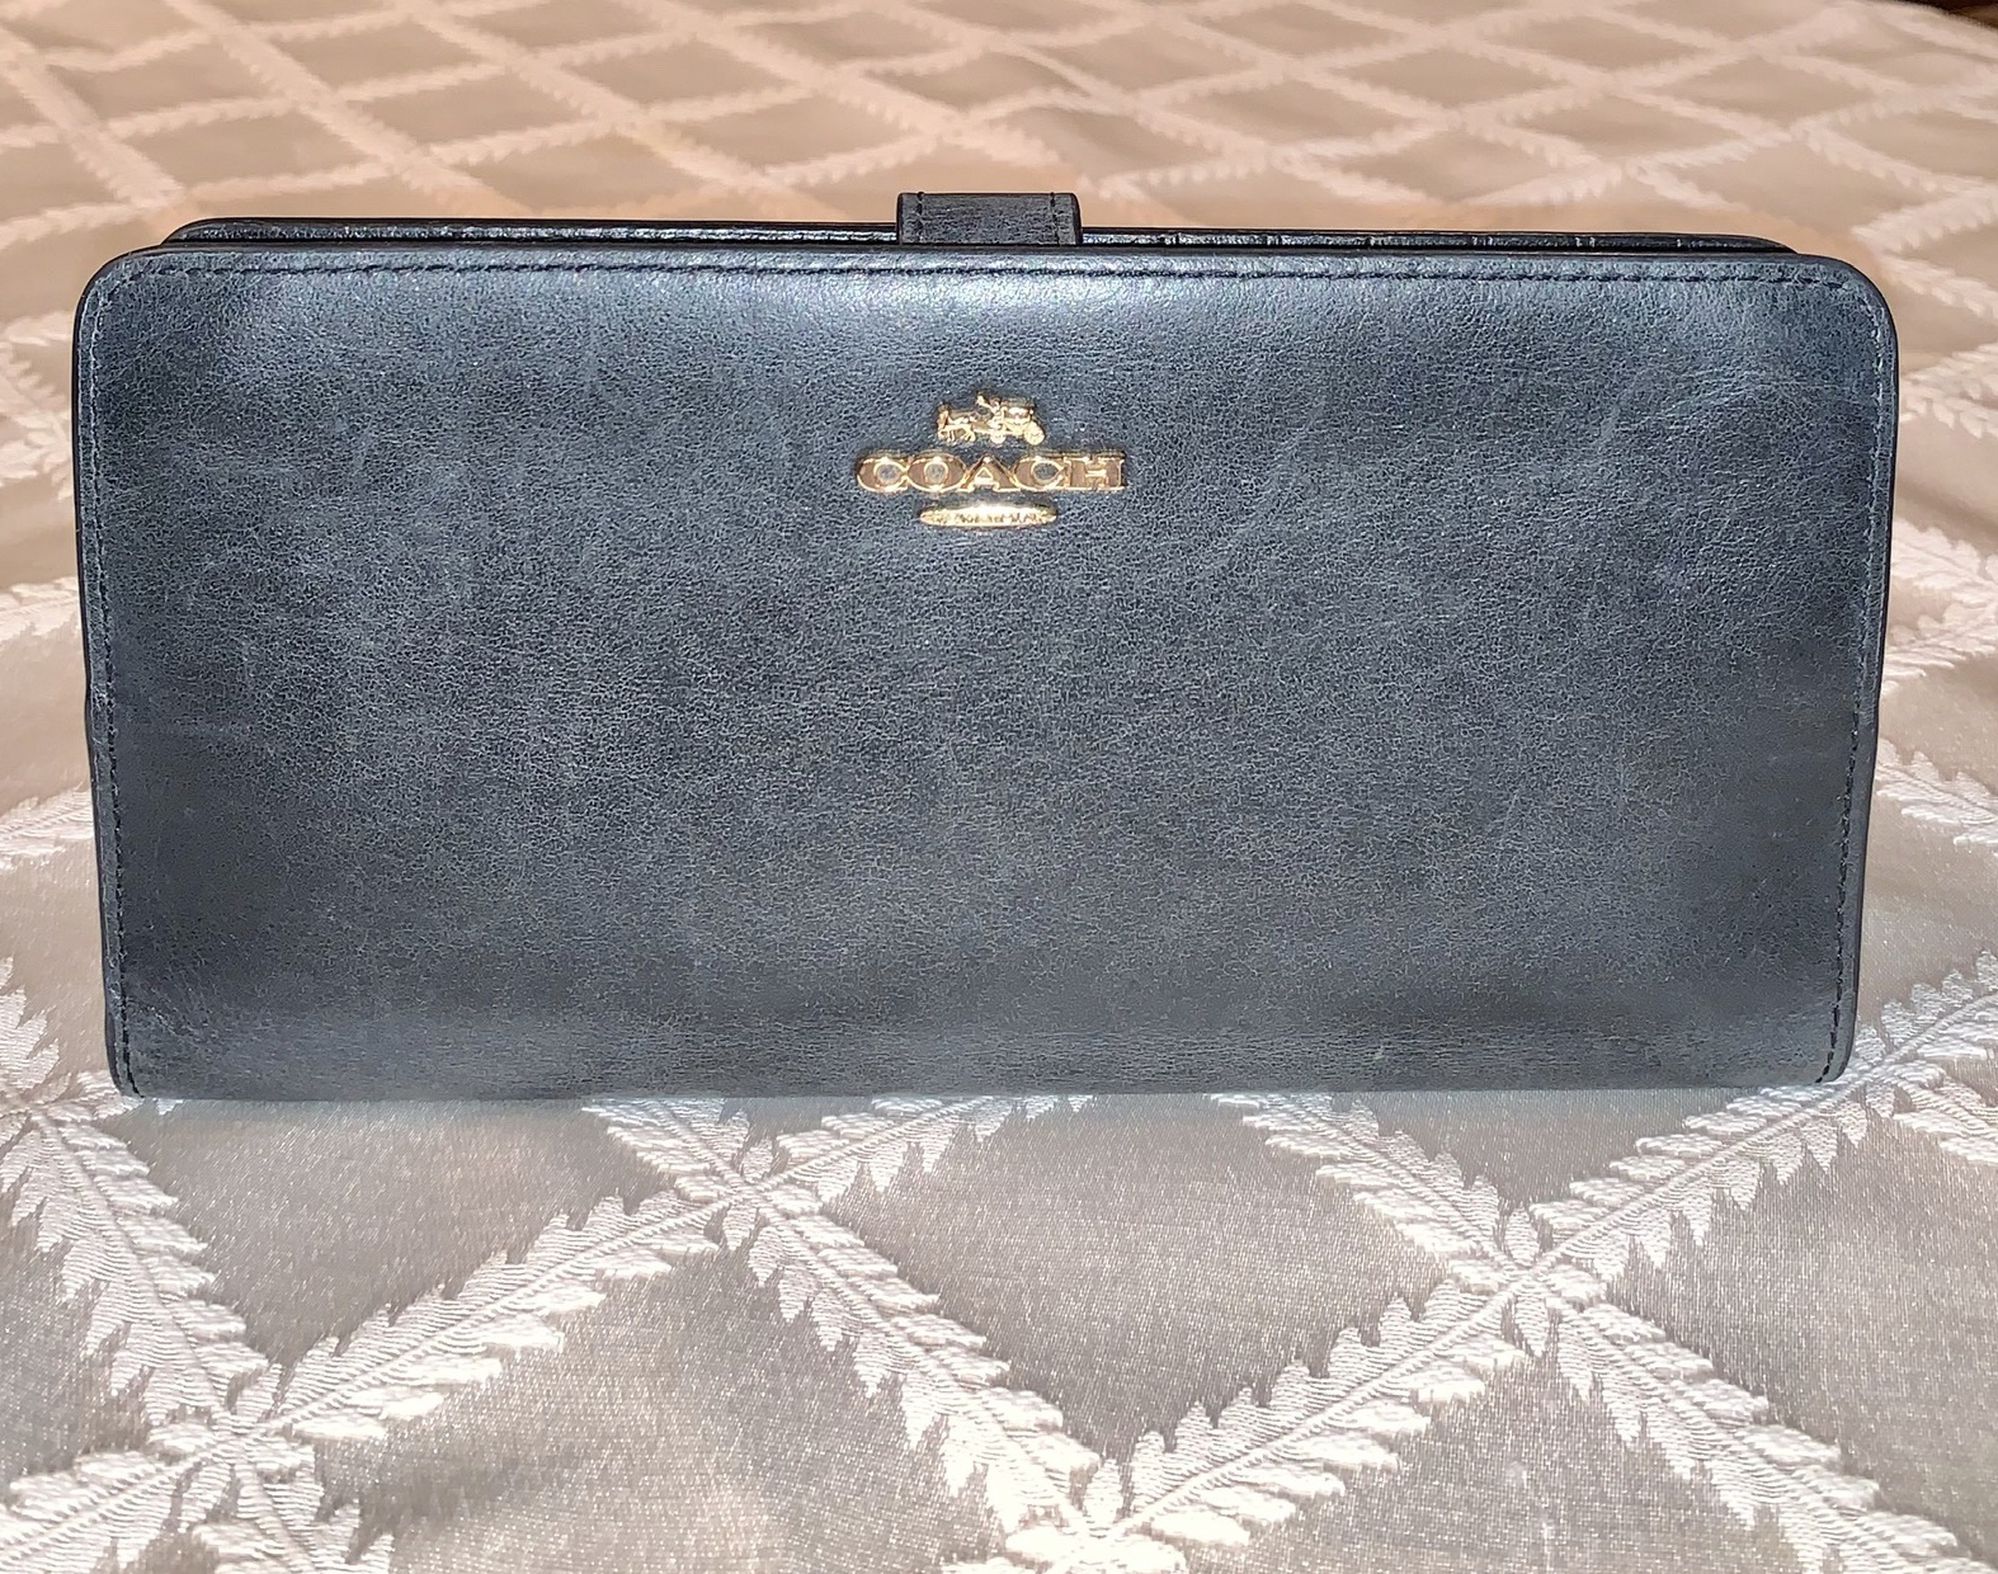 Authentic Coach Skinny Leather Wallet